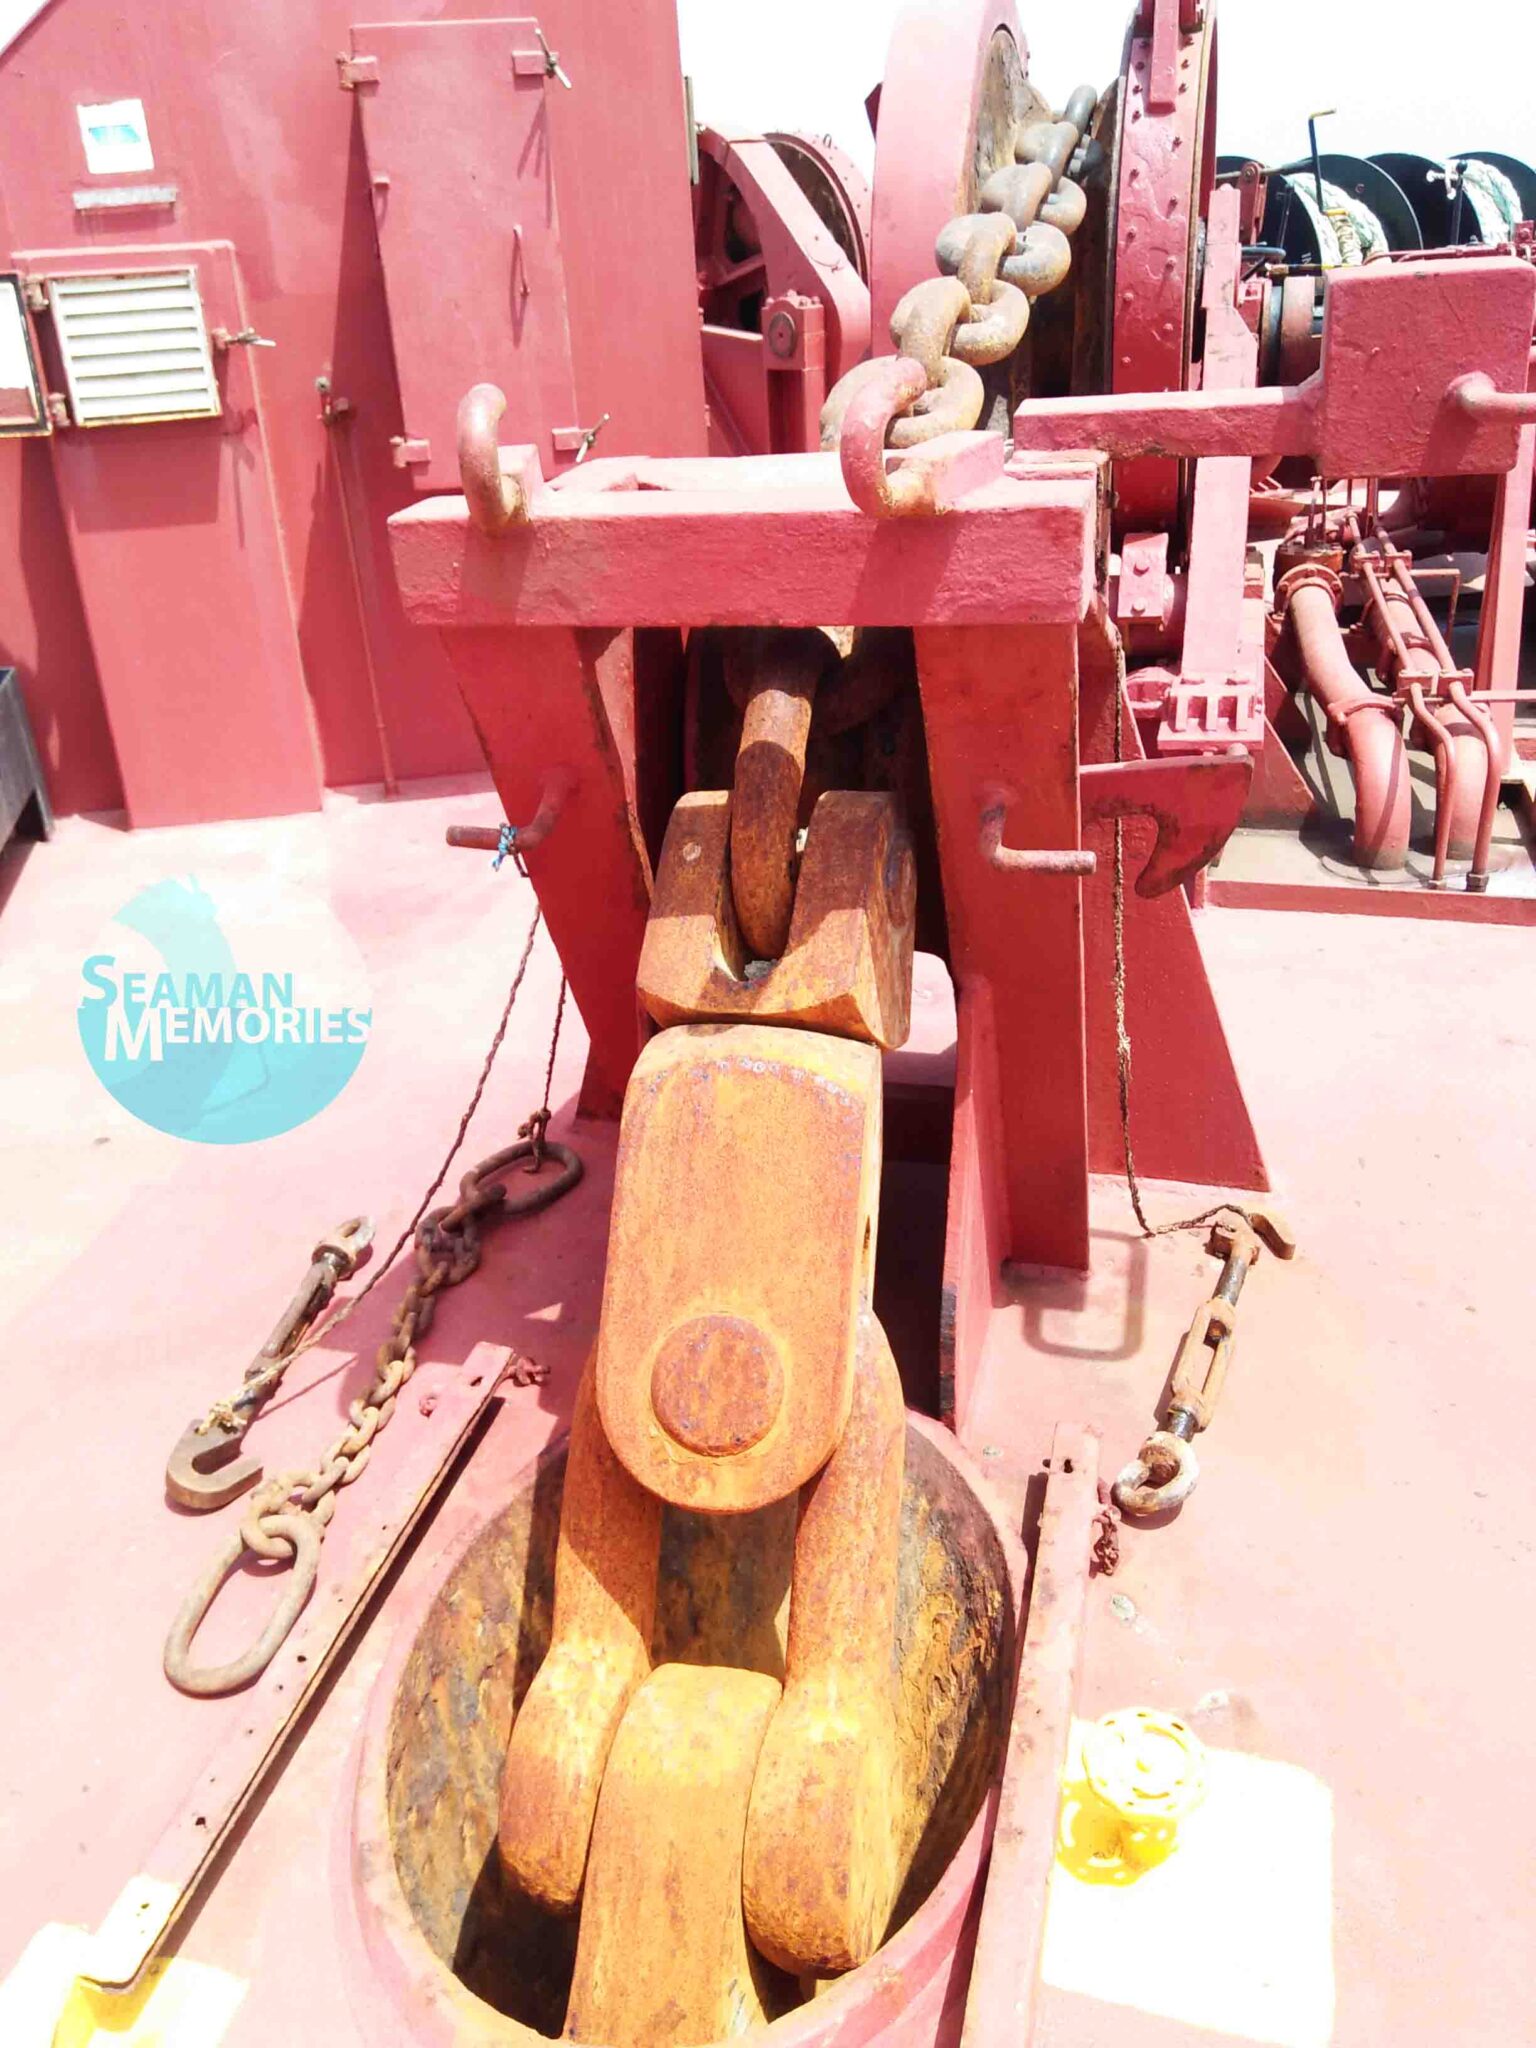 Port side anchors unlashed with its stopper still in position, break made fast, gears disengaged, and the lashings placed on deck